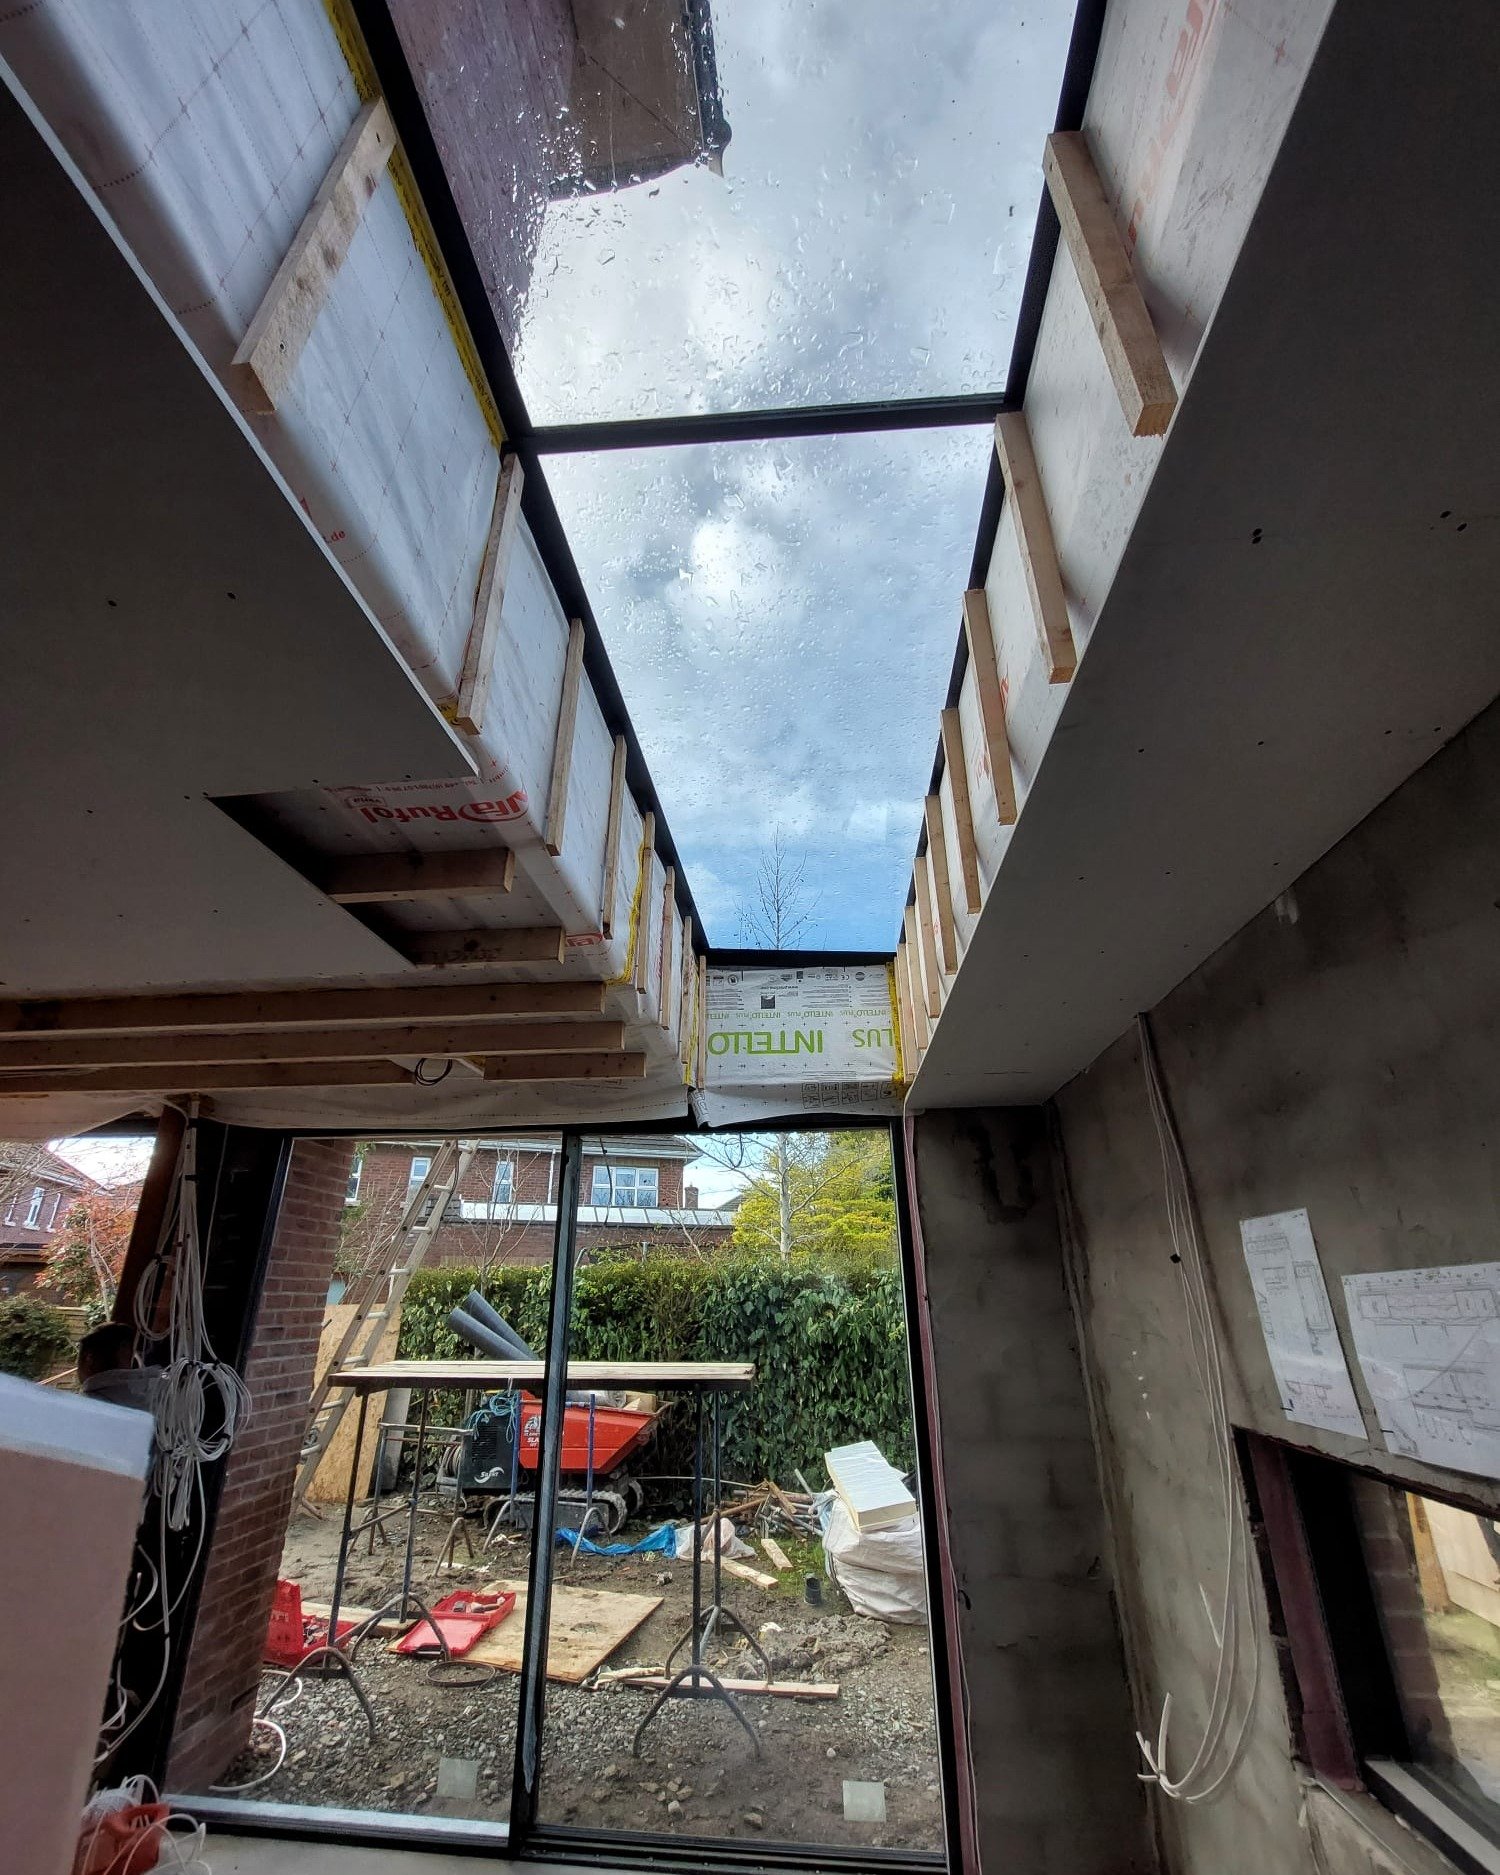 On site 👷&zwj;♂️

Large flush glazed roof-light in progress for a client.

This is going to flood the home with light &amp; make the space so much bigger!
.
.
.
#architect #irisharchitect #irisharchitecture #irishdesign #irishhomes #dublinhomes #arc